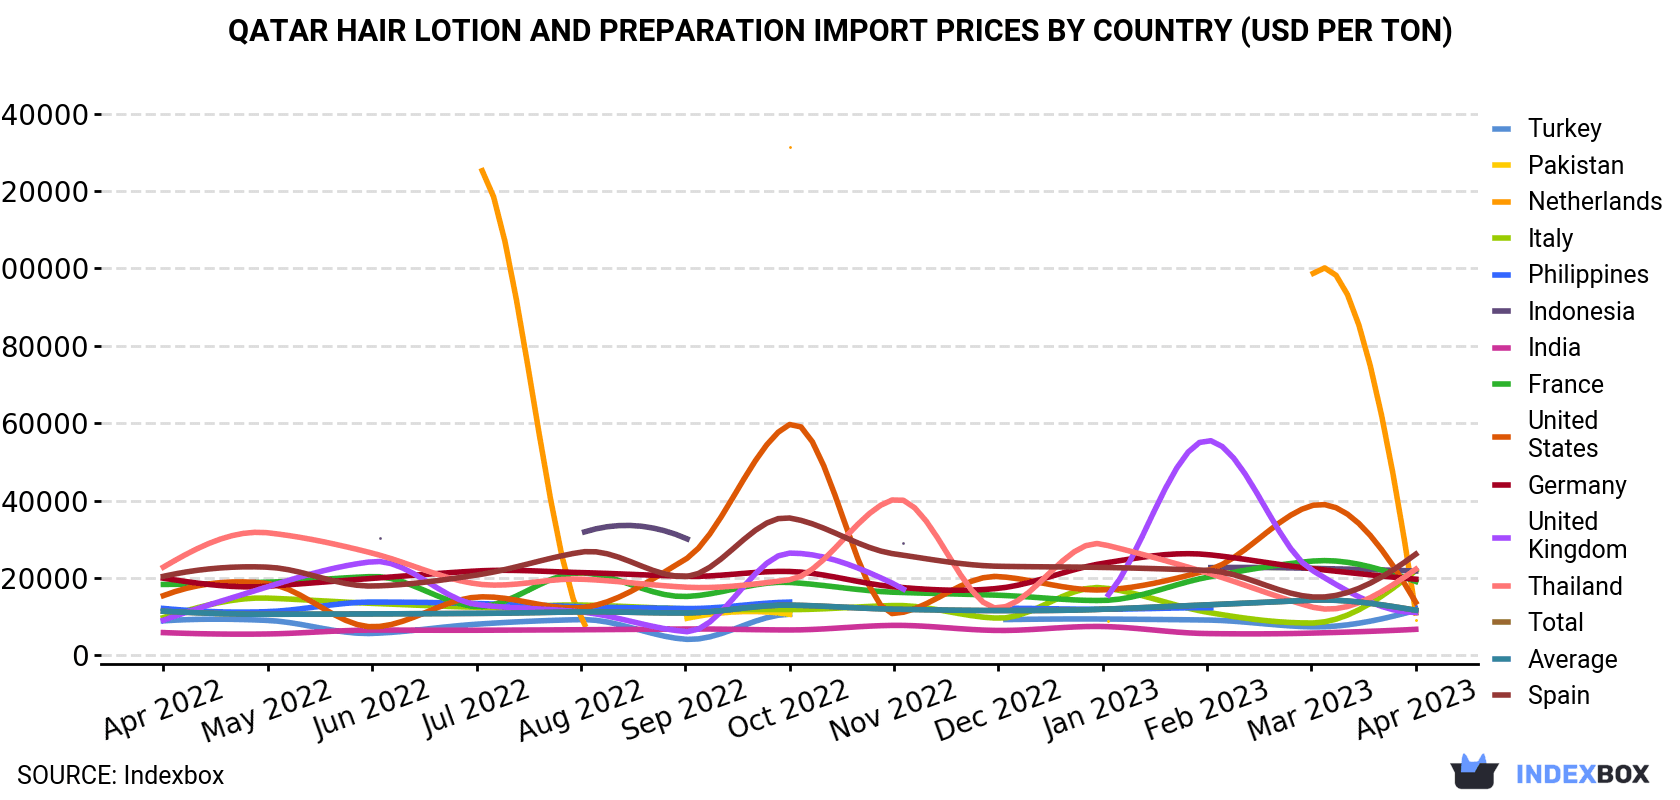 Qatar Hair Lotion and Preparation Import Prices By Country (USD Per Ton)